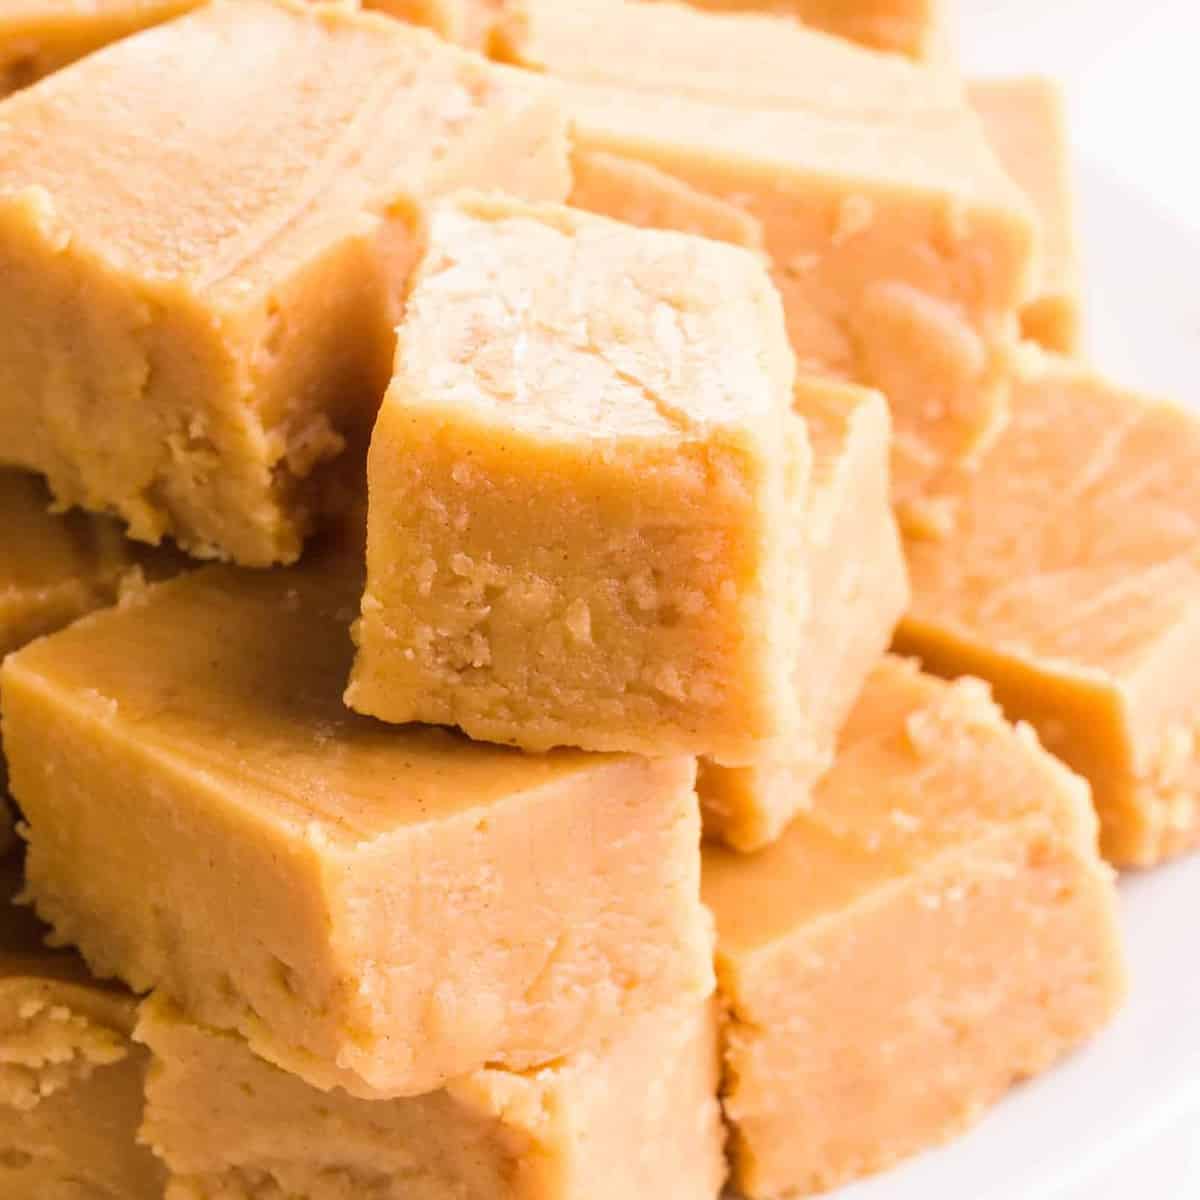  You won't believe this fudge is made with only 4 ingredients.